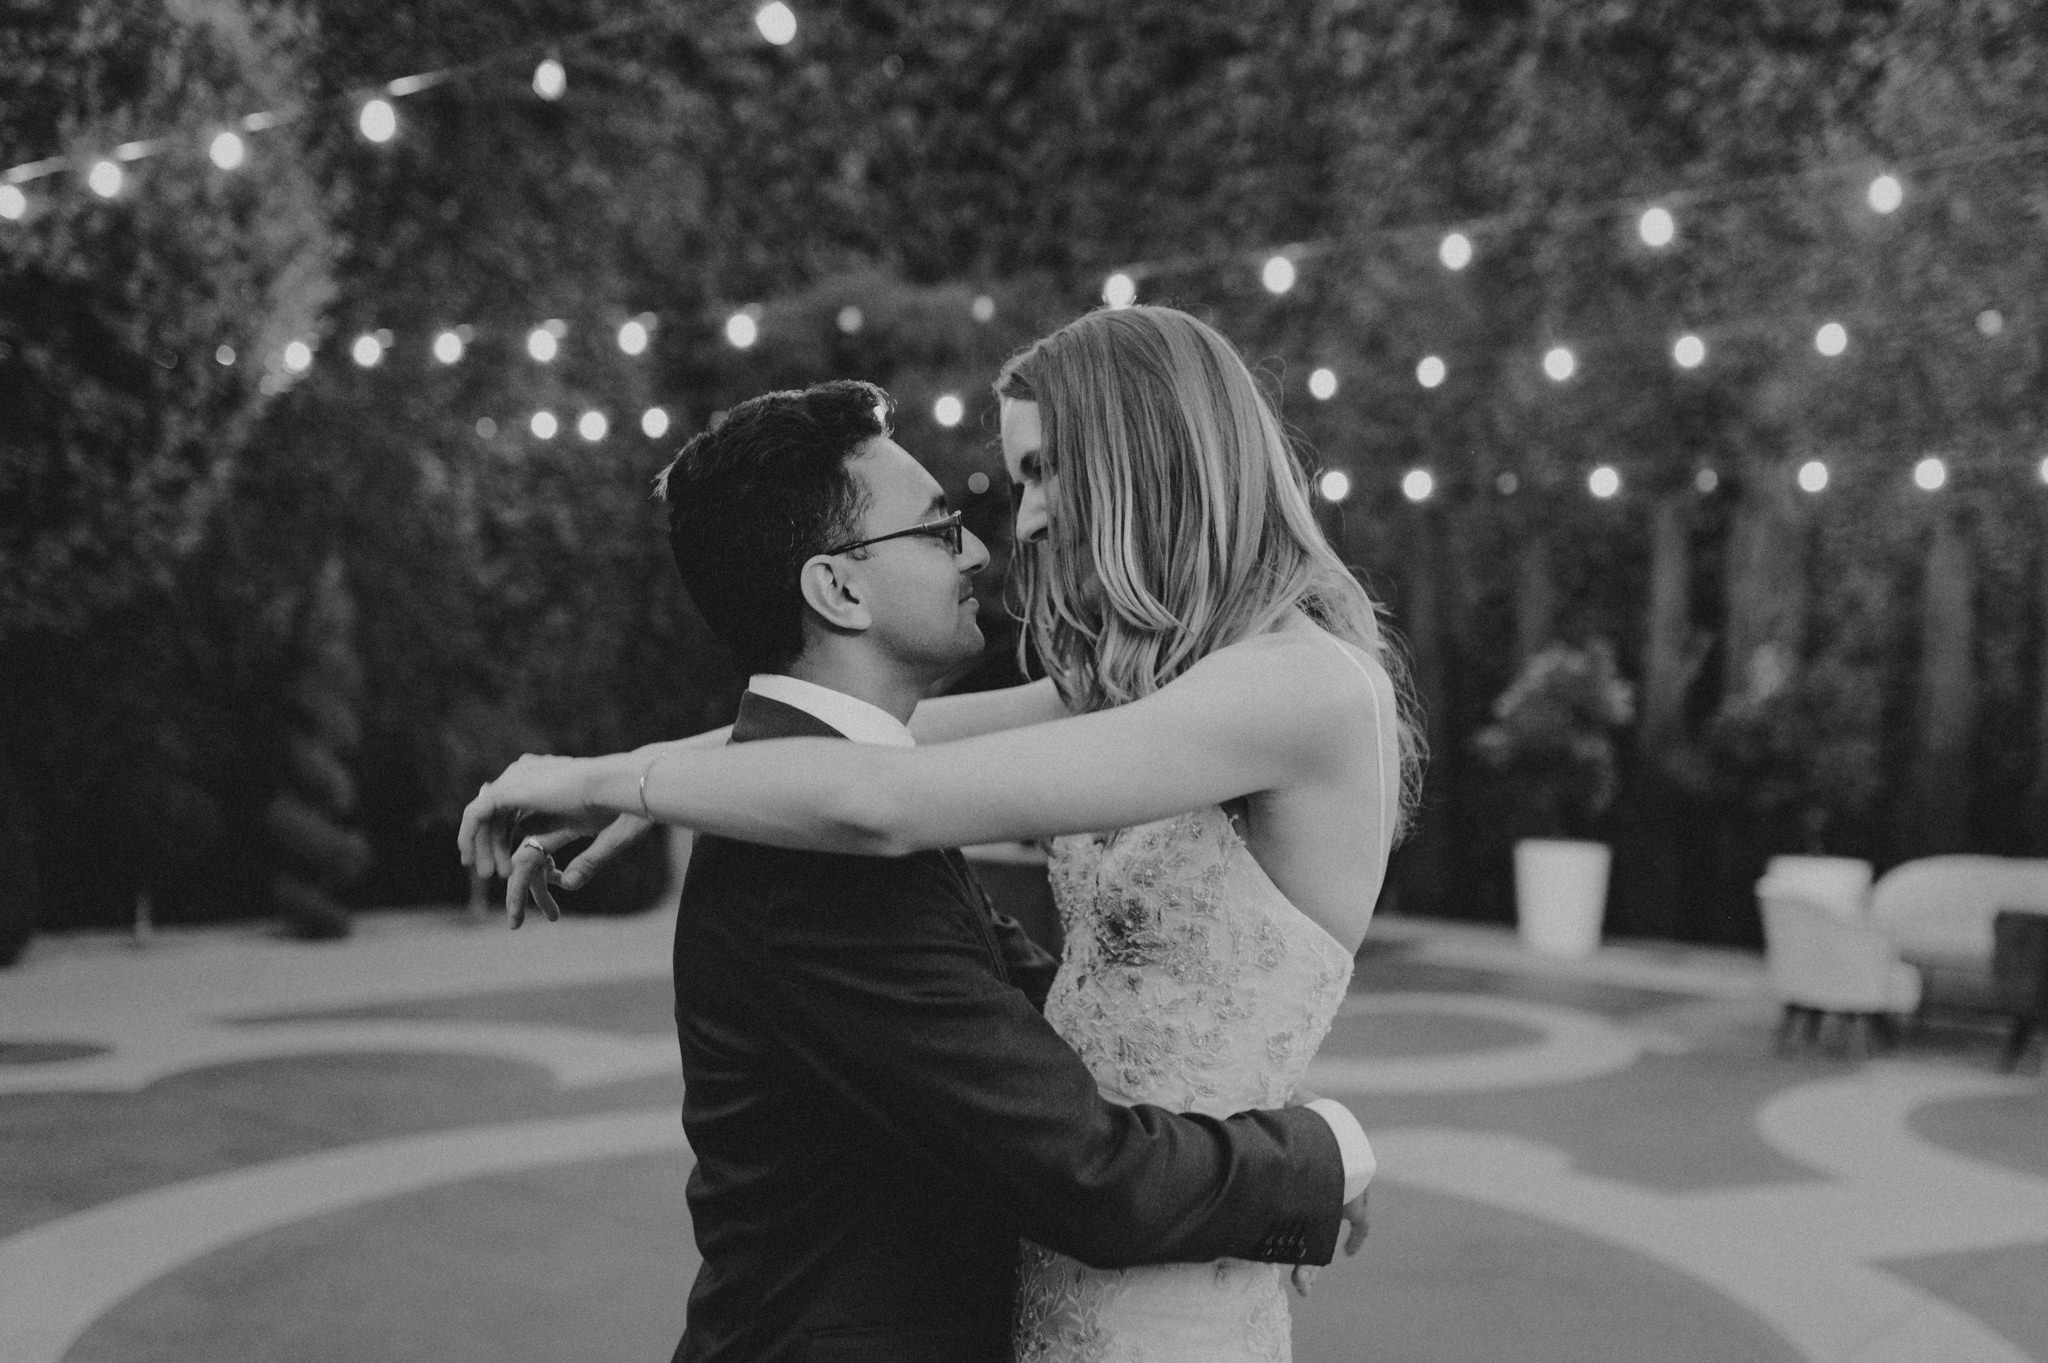 the fig house wedding - queer wedding photographers in los angeles - itlaphoto.com-105.jpg